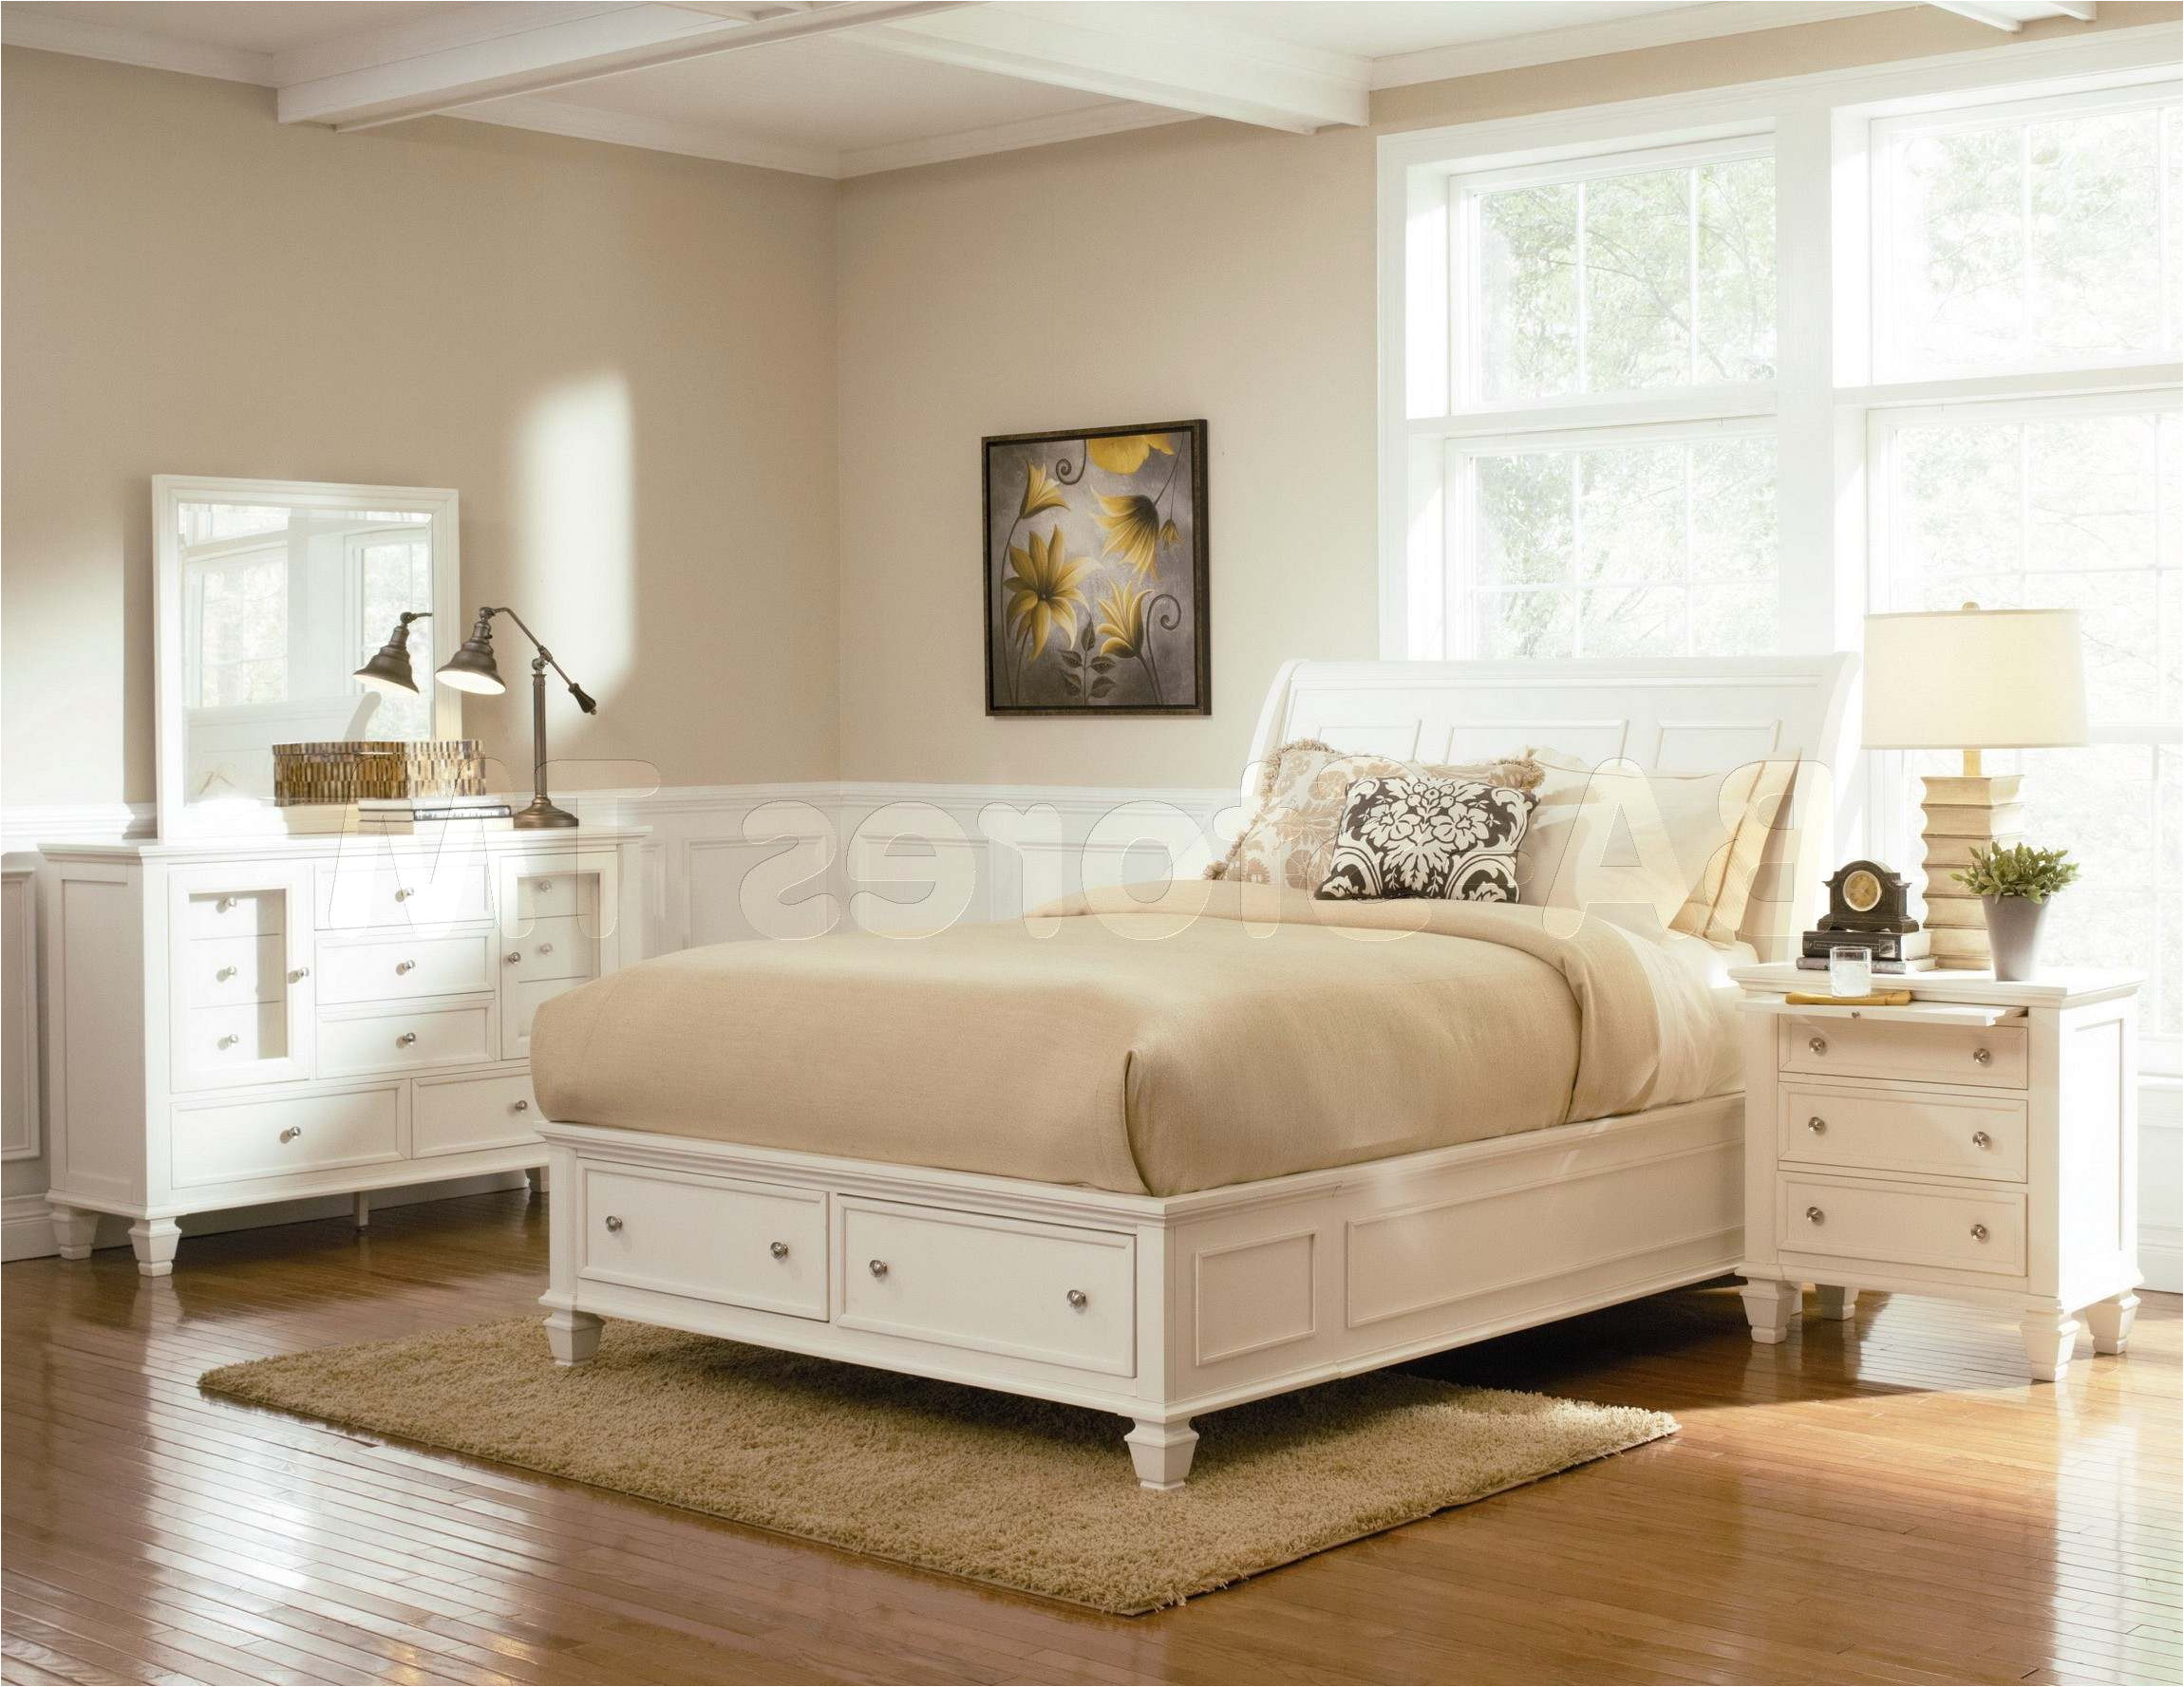 bedroom sets without headboard american freight bedroom setsdroom furniture raya furniture